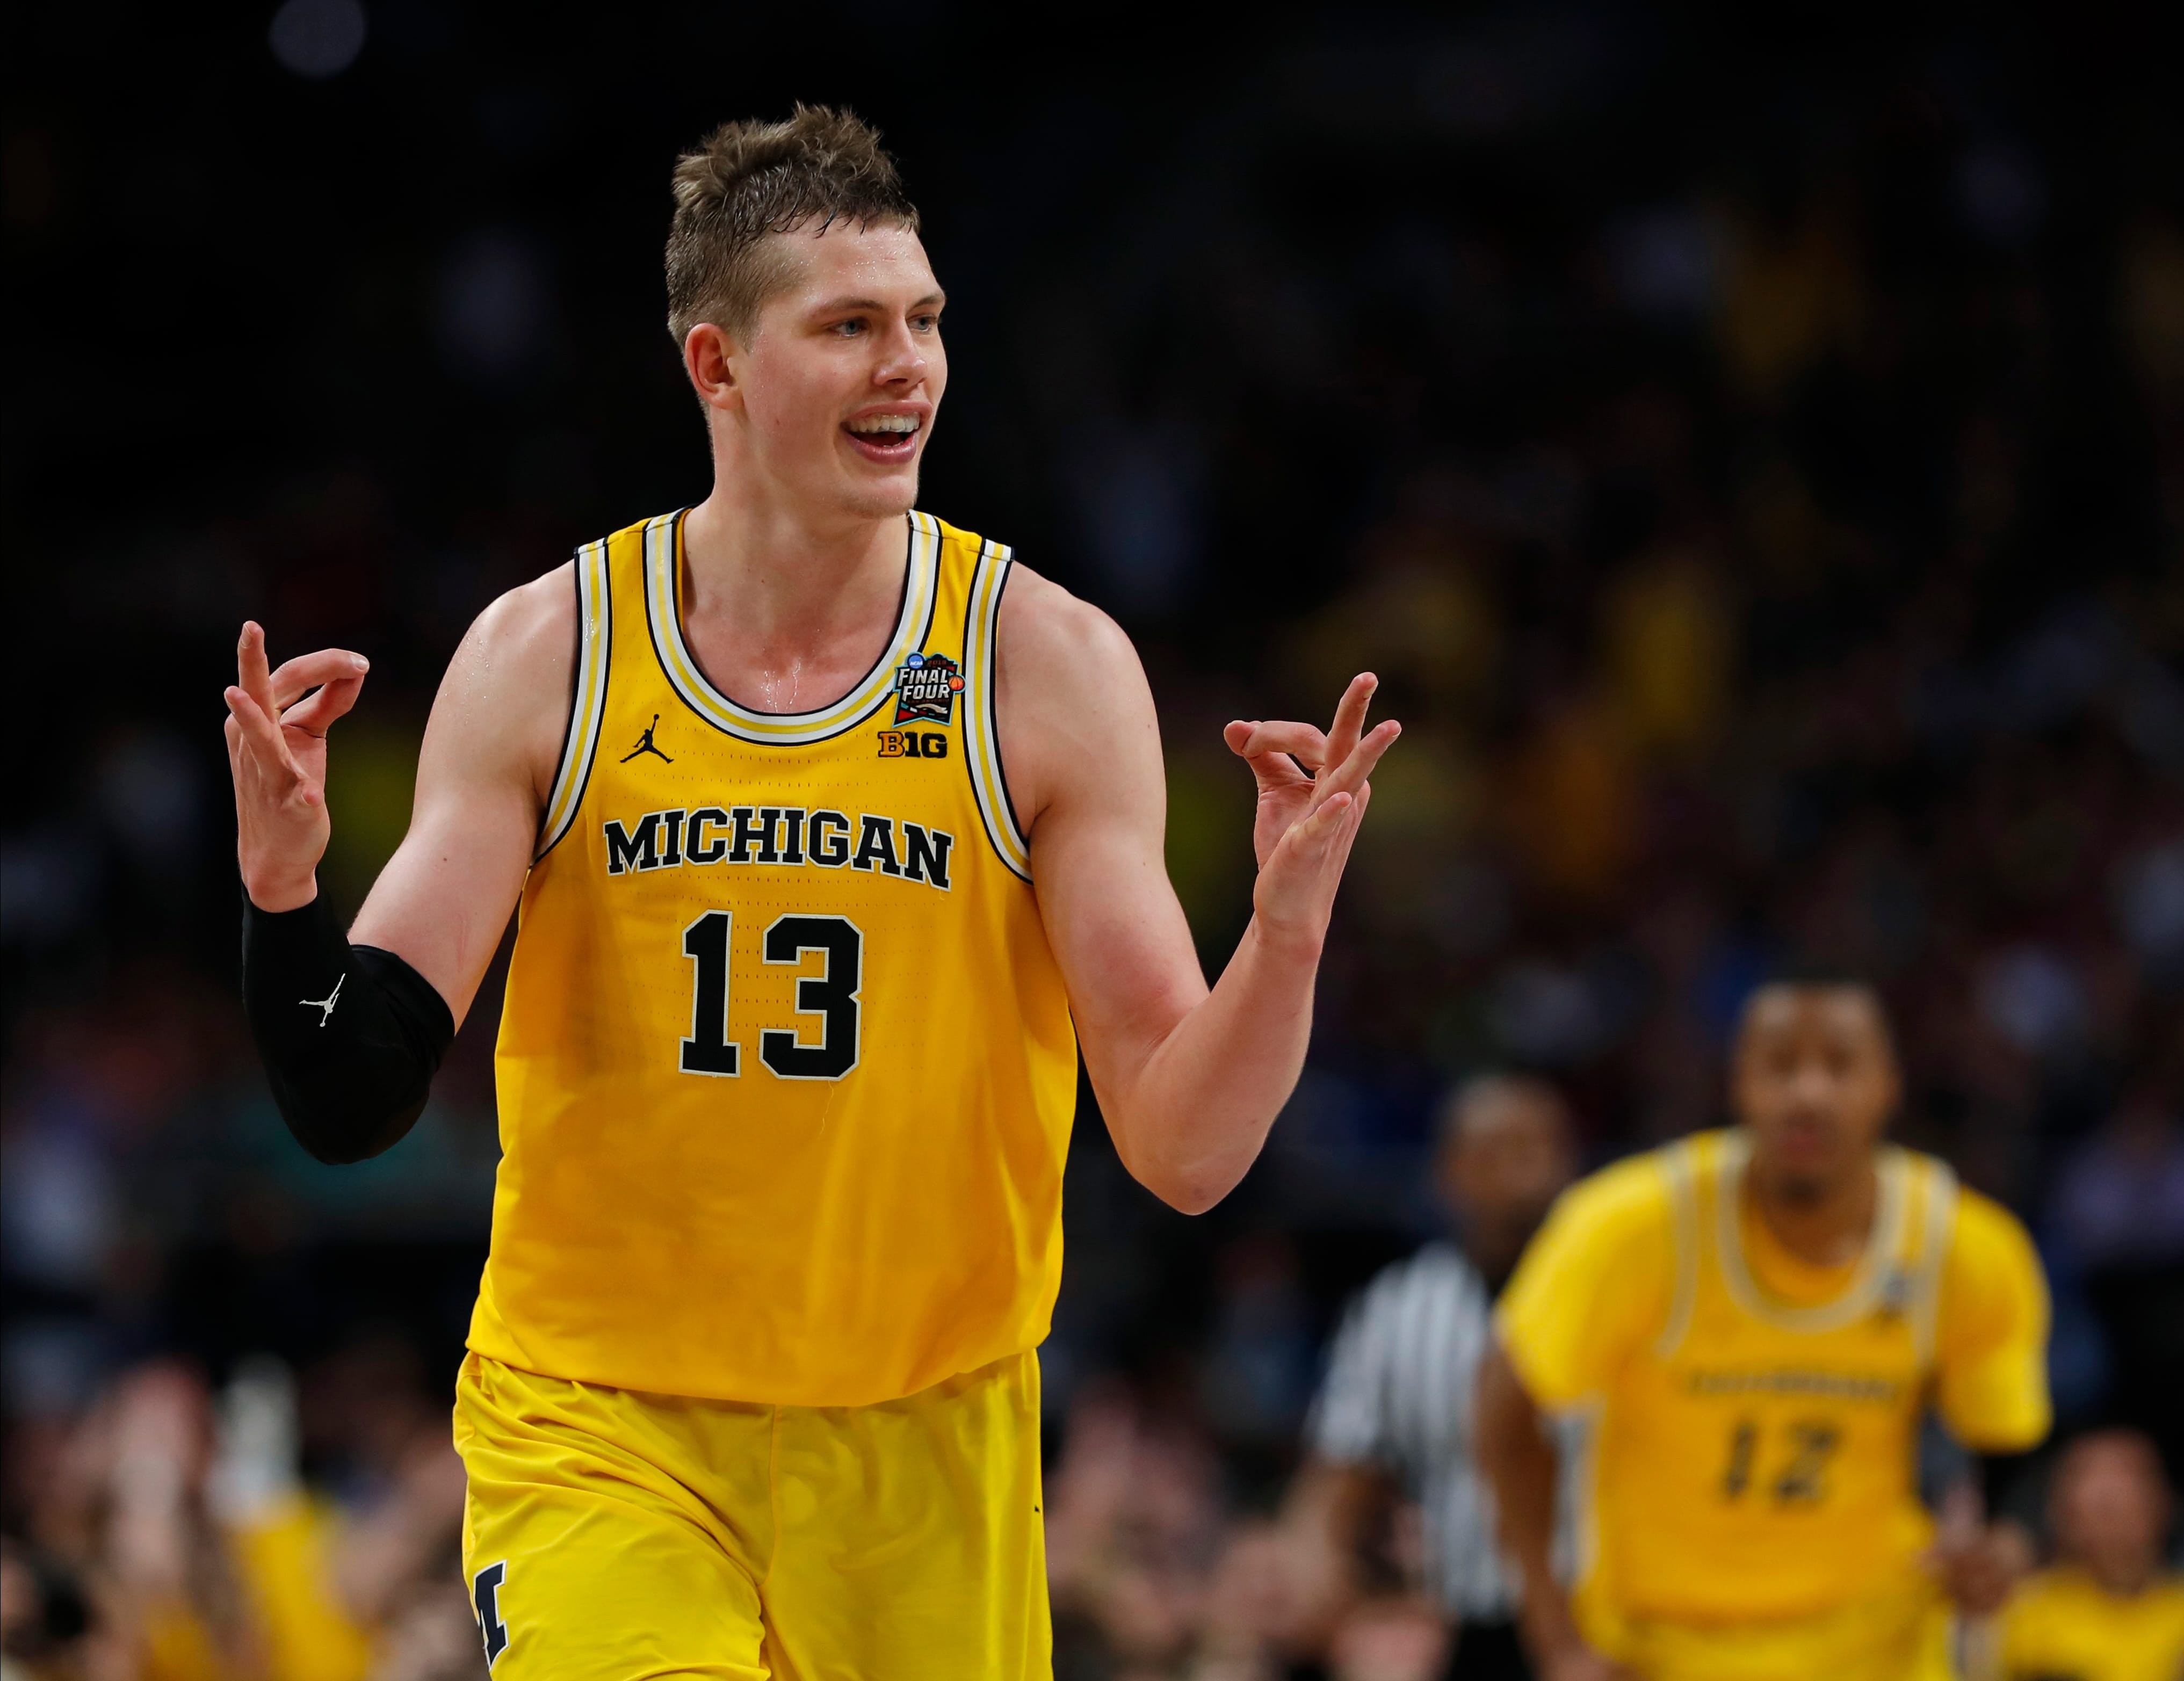 Michigan's Moritz Wagner (13) reacts after scoring a 3-point shot against Loyola-Chicago during the second half in the semifinals of the Final Four NCAA college basketball tournament, Saturday, March 31, 2018, in San Antonio.